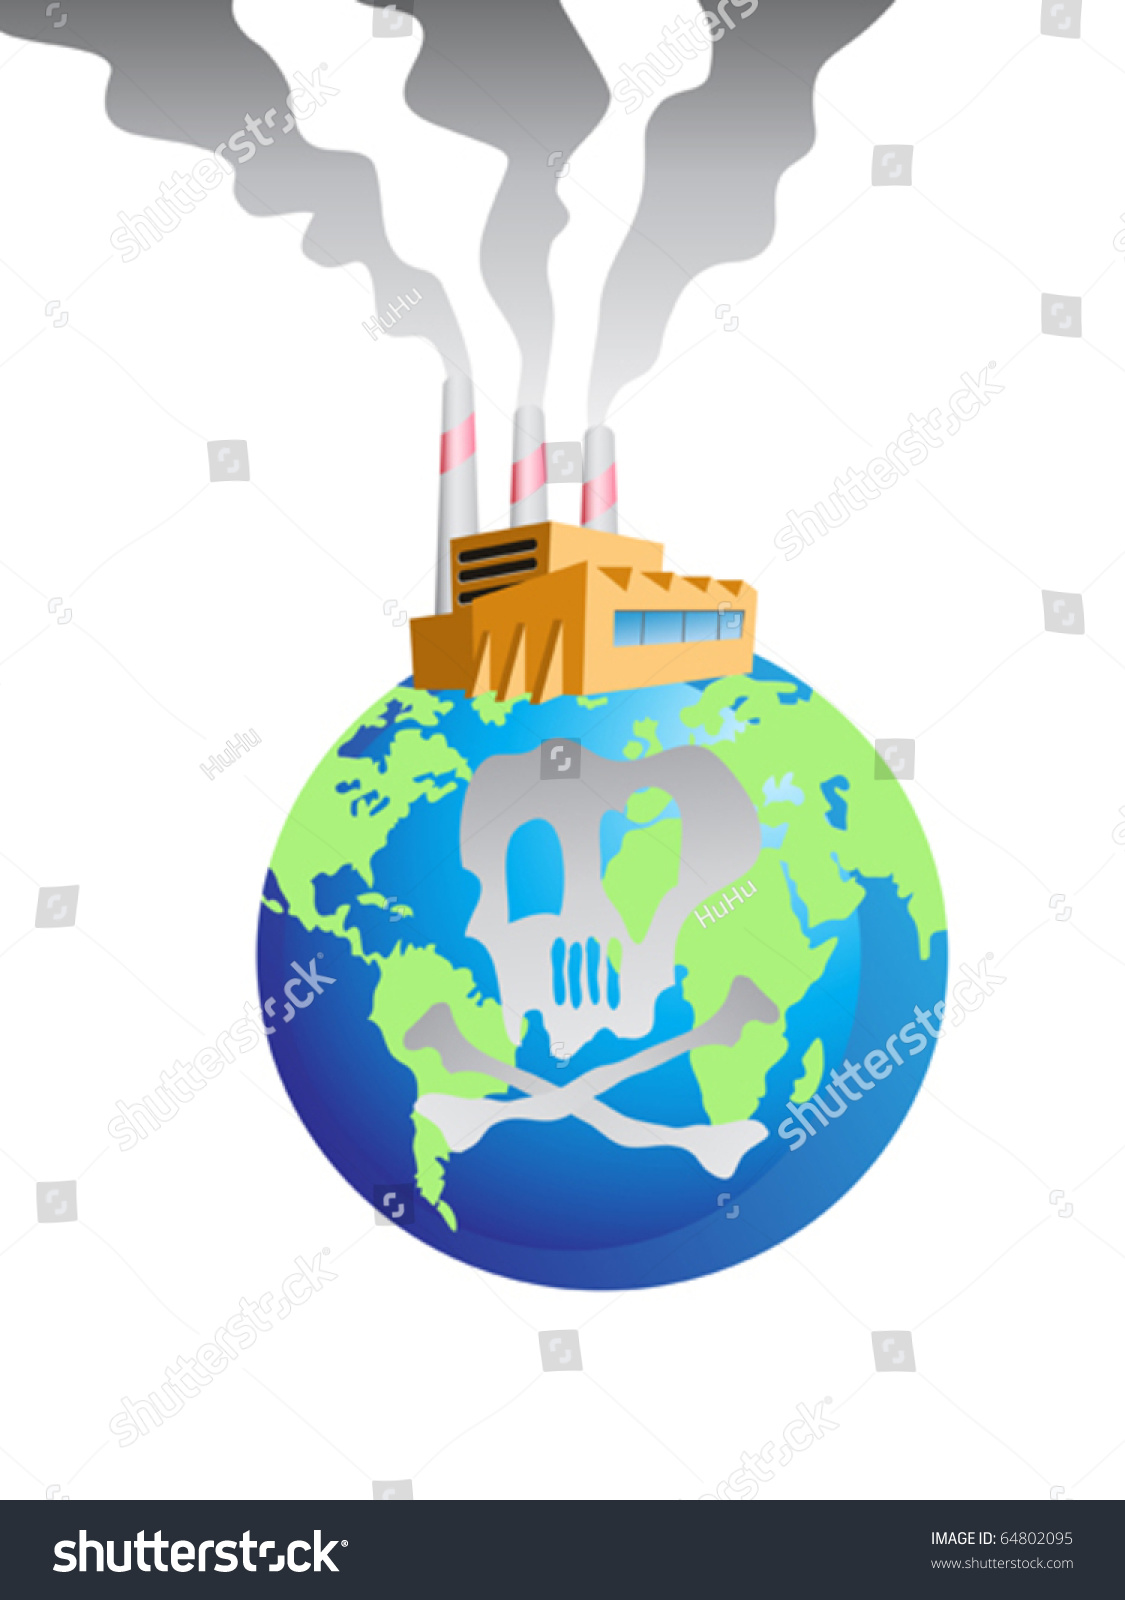 Image result for pictures of a polluted earth